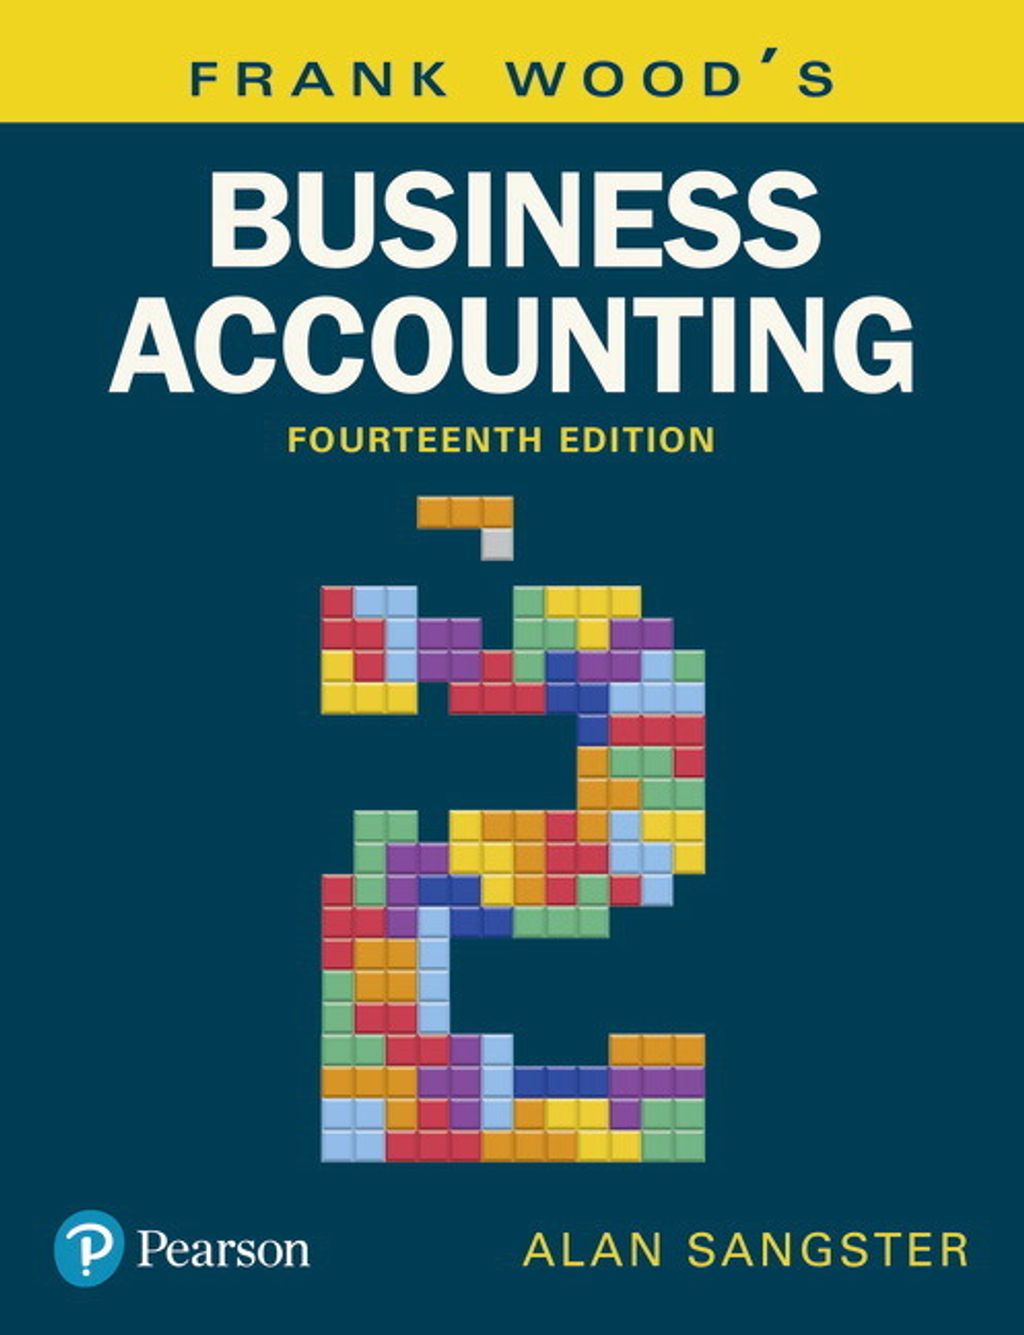 9781292209173 Frank-Woods-Business-Accounting VOL2 14E.jfif